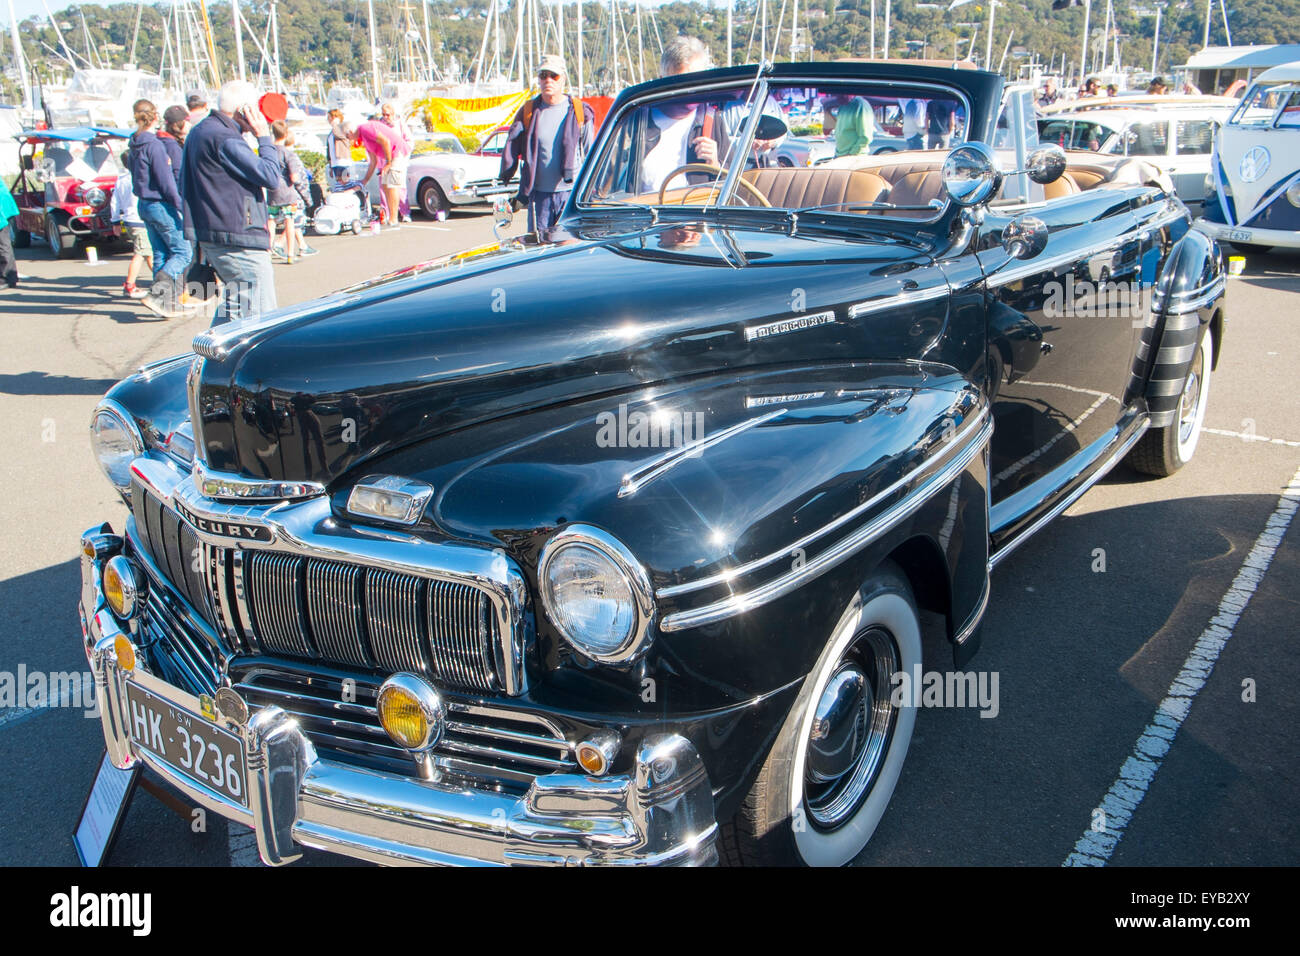 1947 model Ford Mercury Convertible at a classic car show in Sydney,NSW,Australia Stock Photo